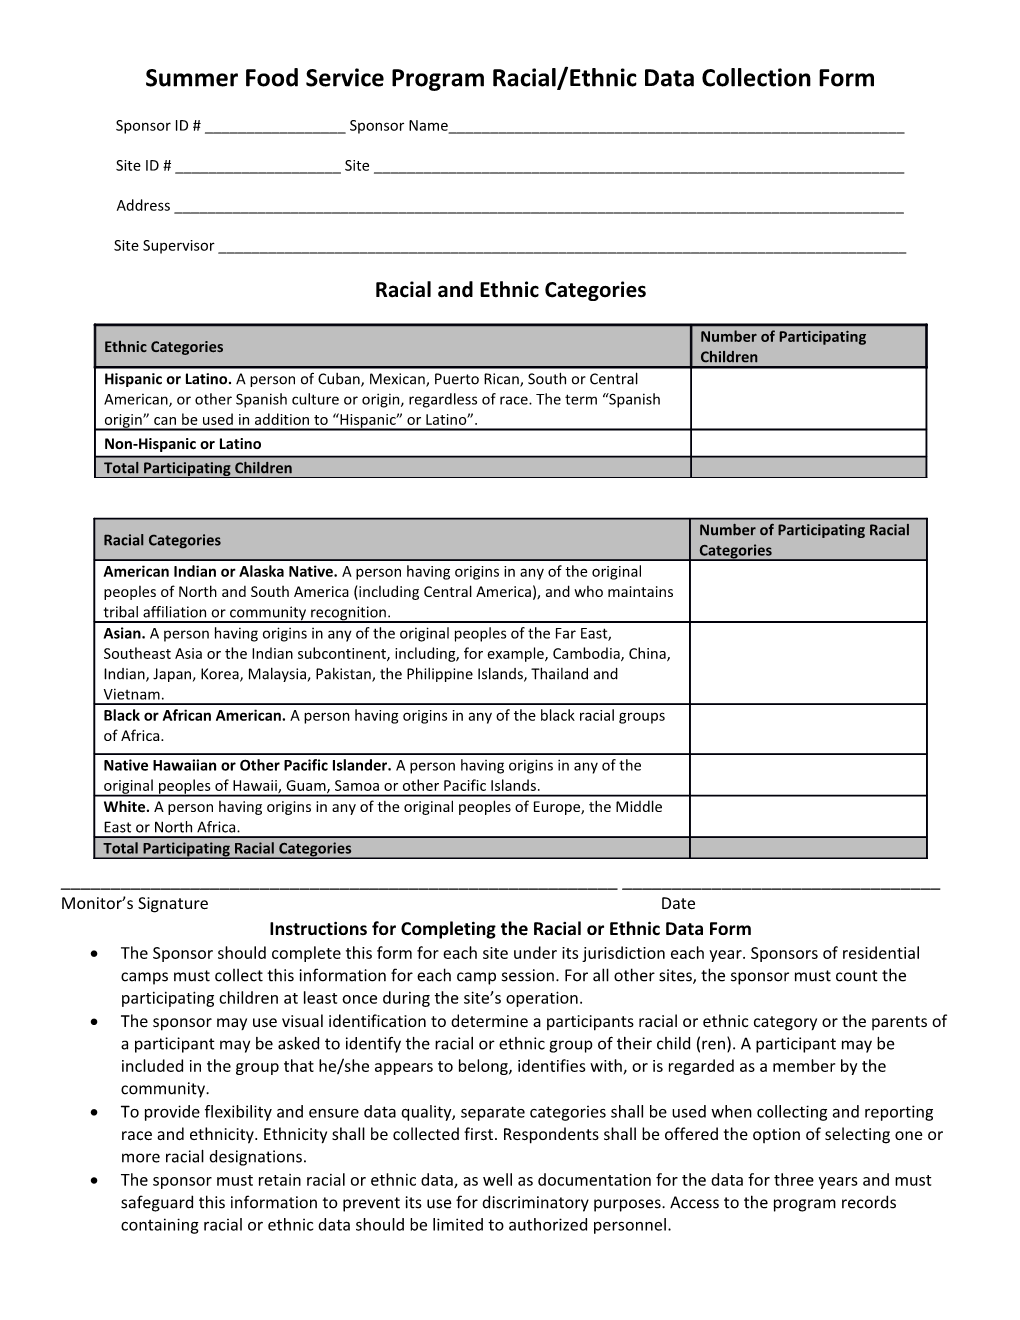 Summer Food Service Program Racial/Ethnic Data Collection Form